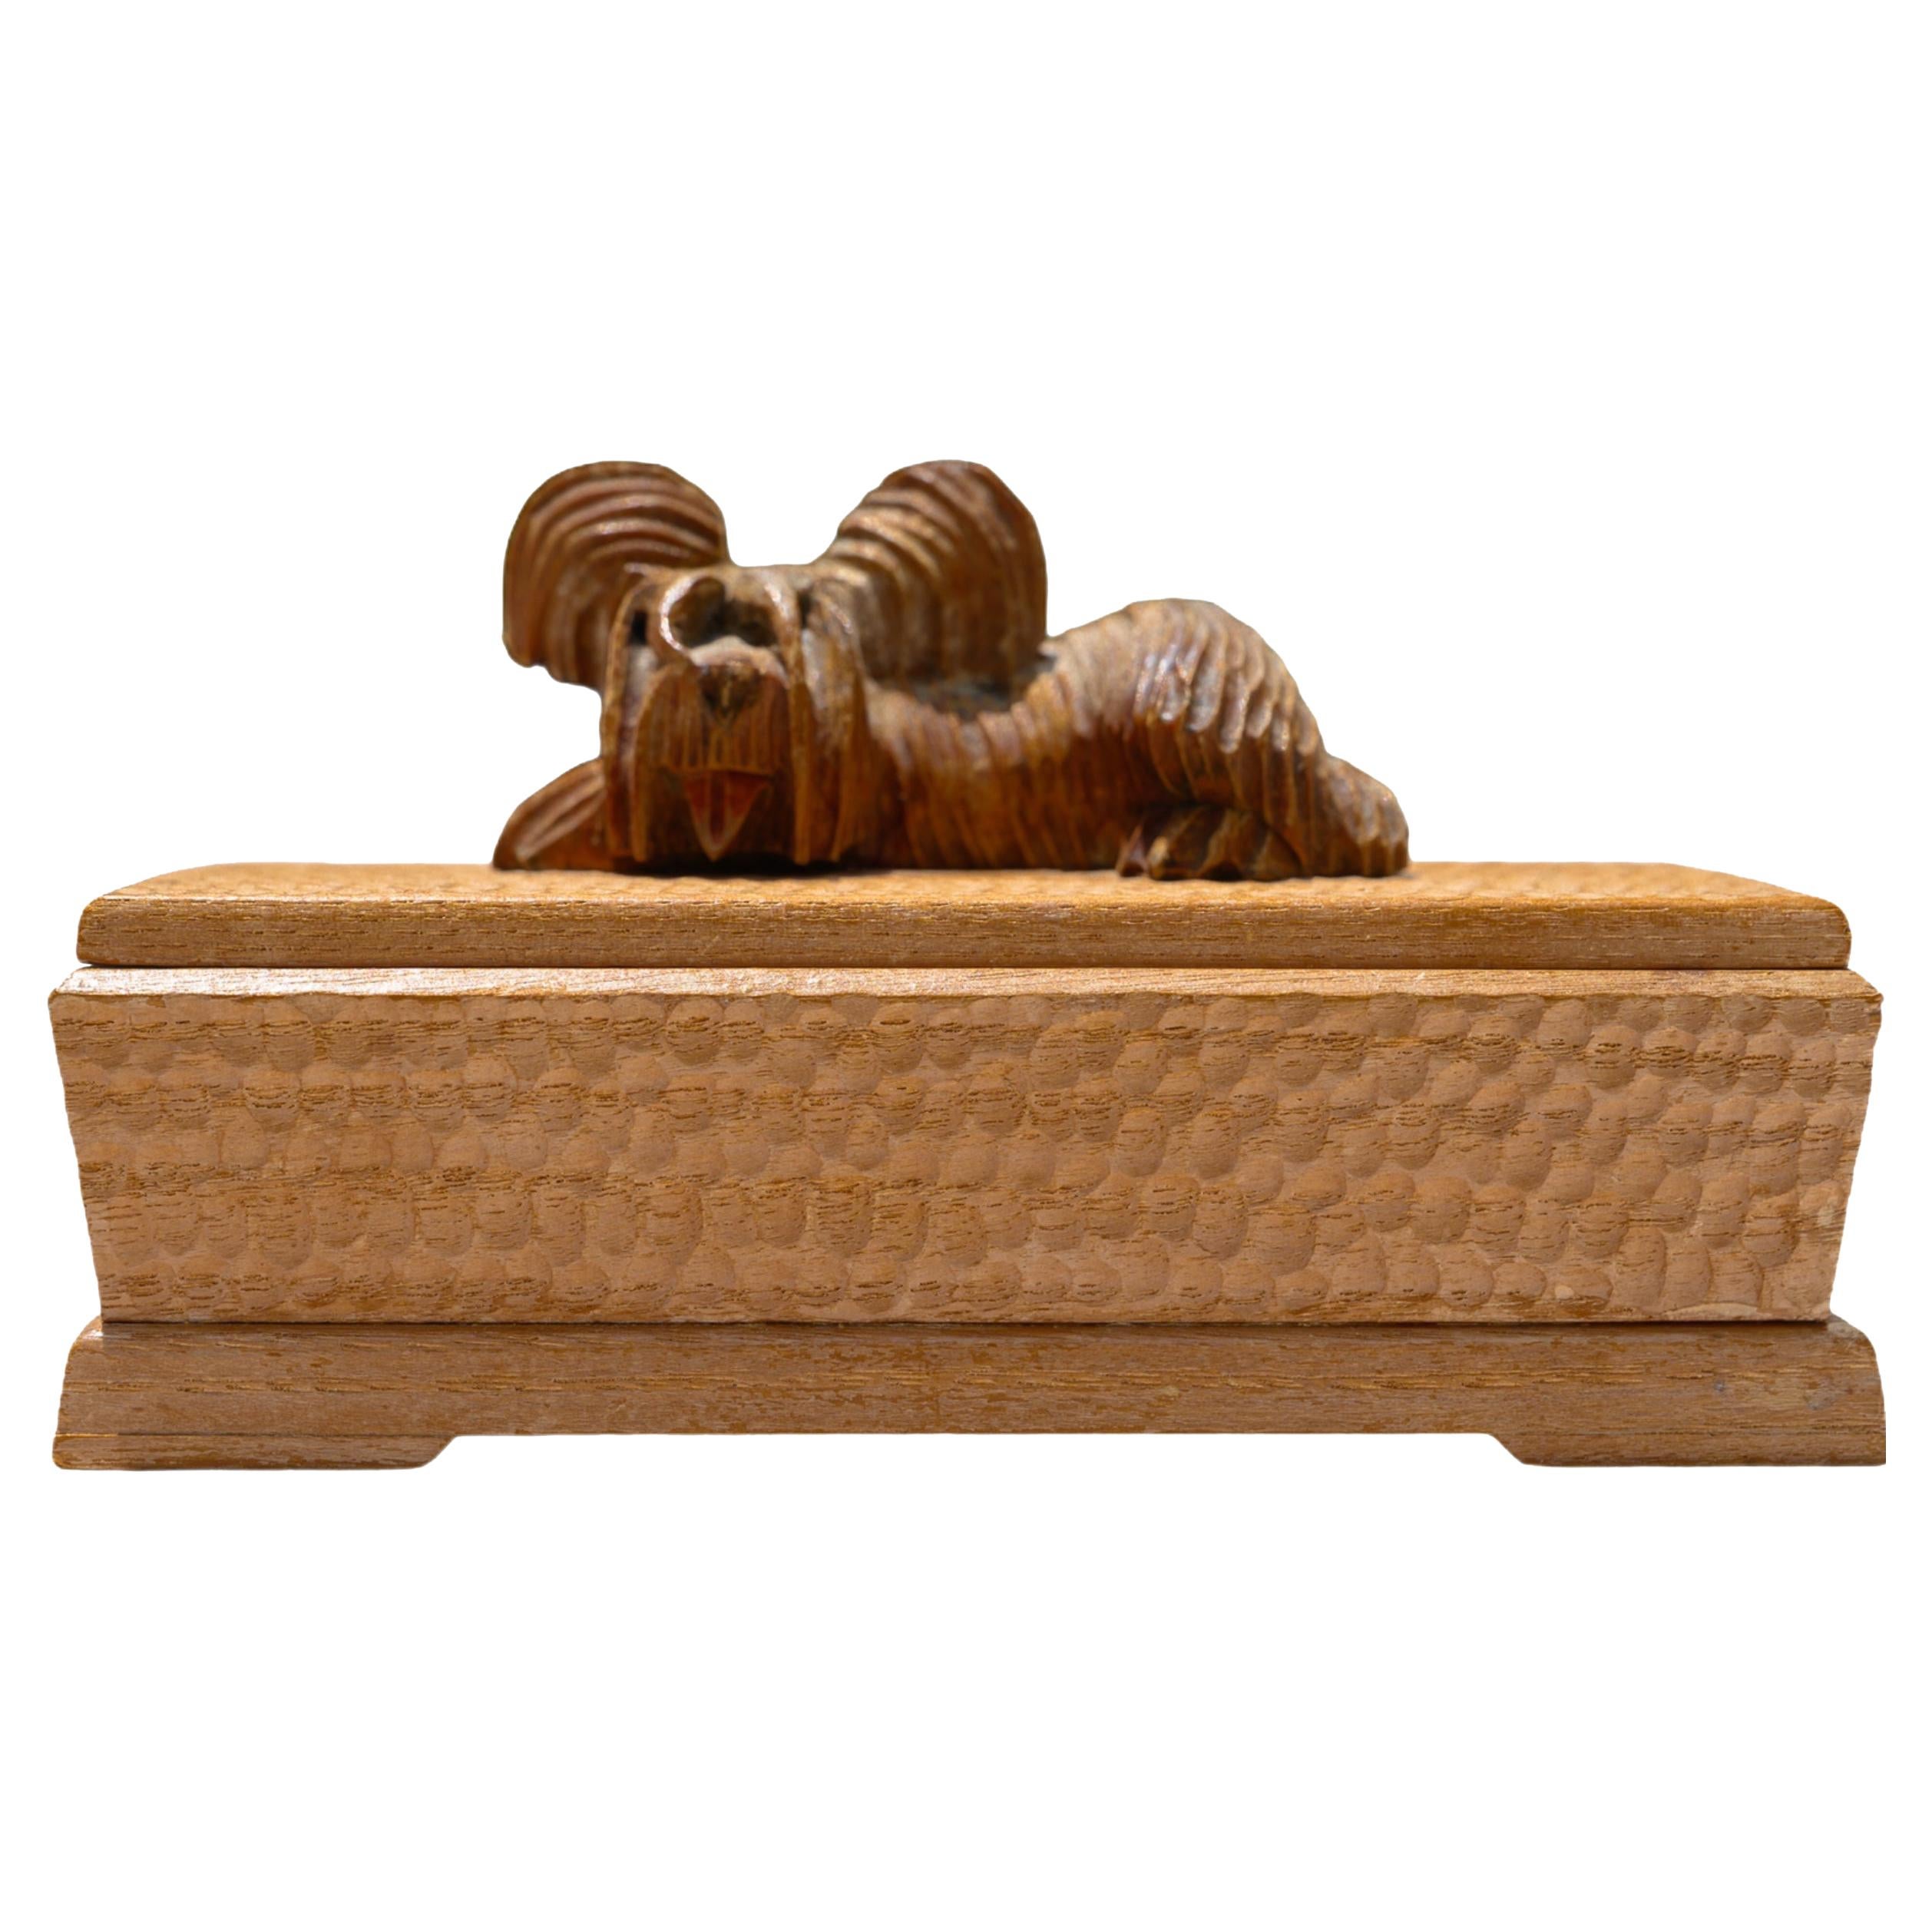 Hand-Carved Decorative Wooden Keepsake Box with Animal Sculpture Lidded Top For Sale